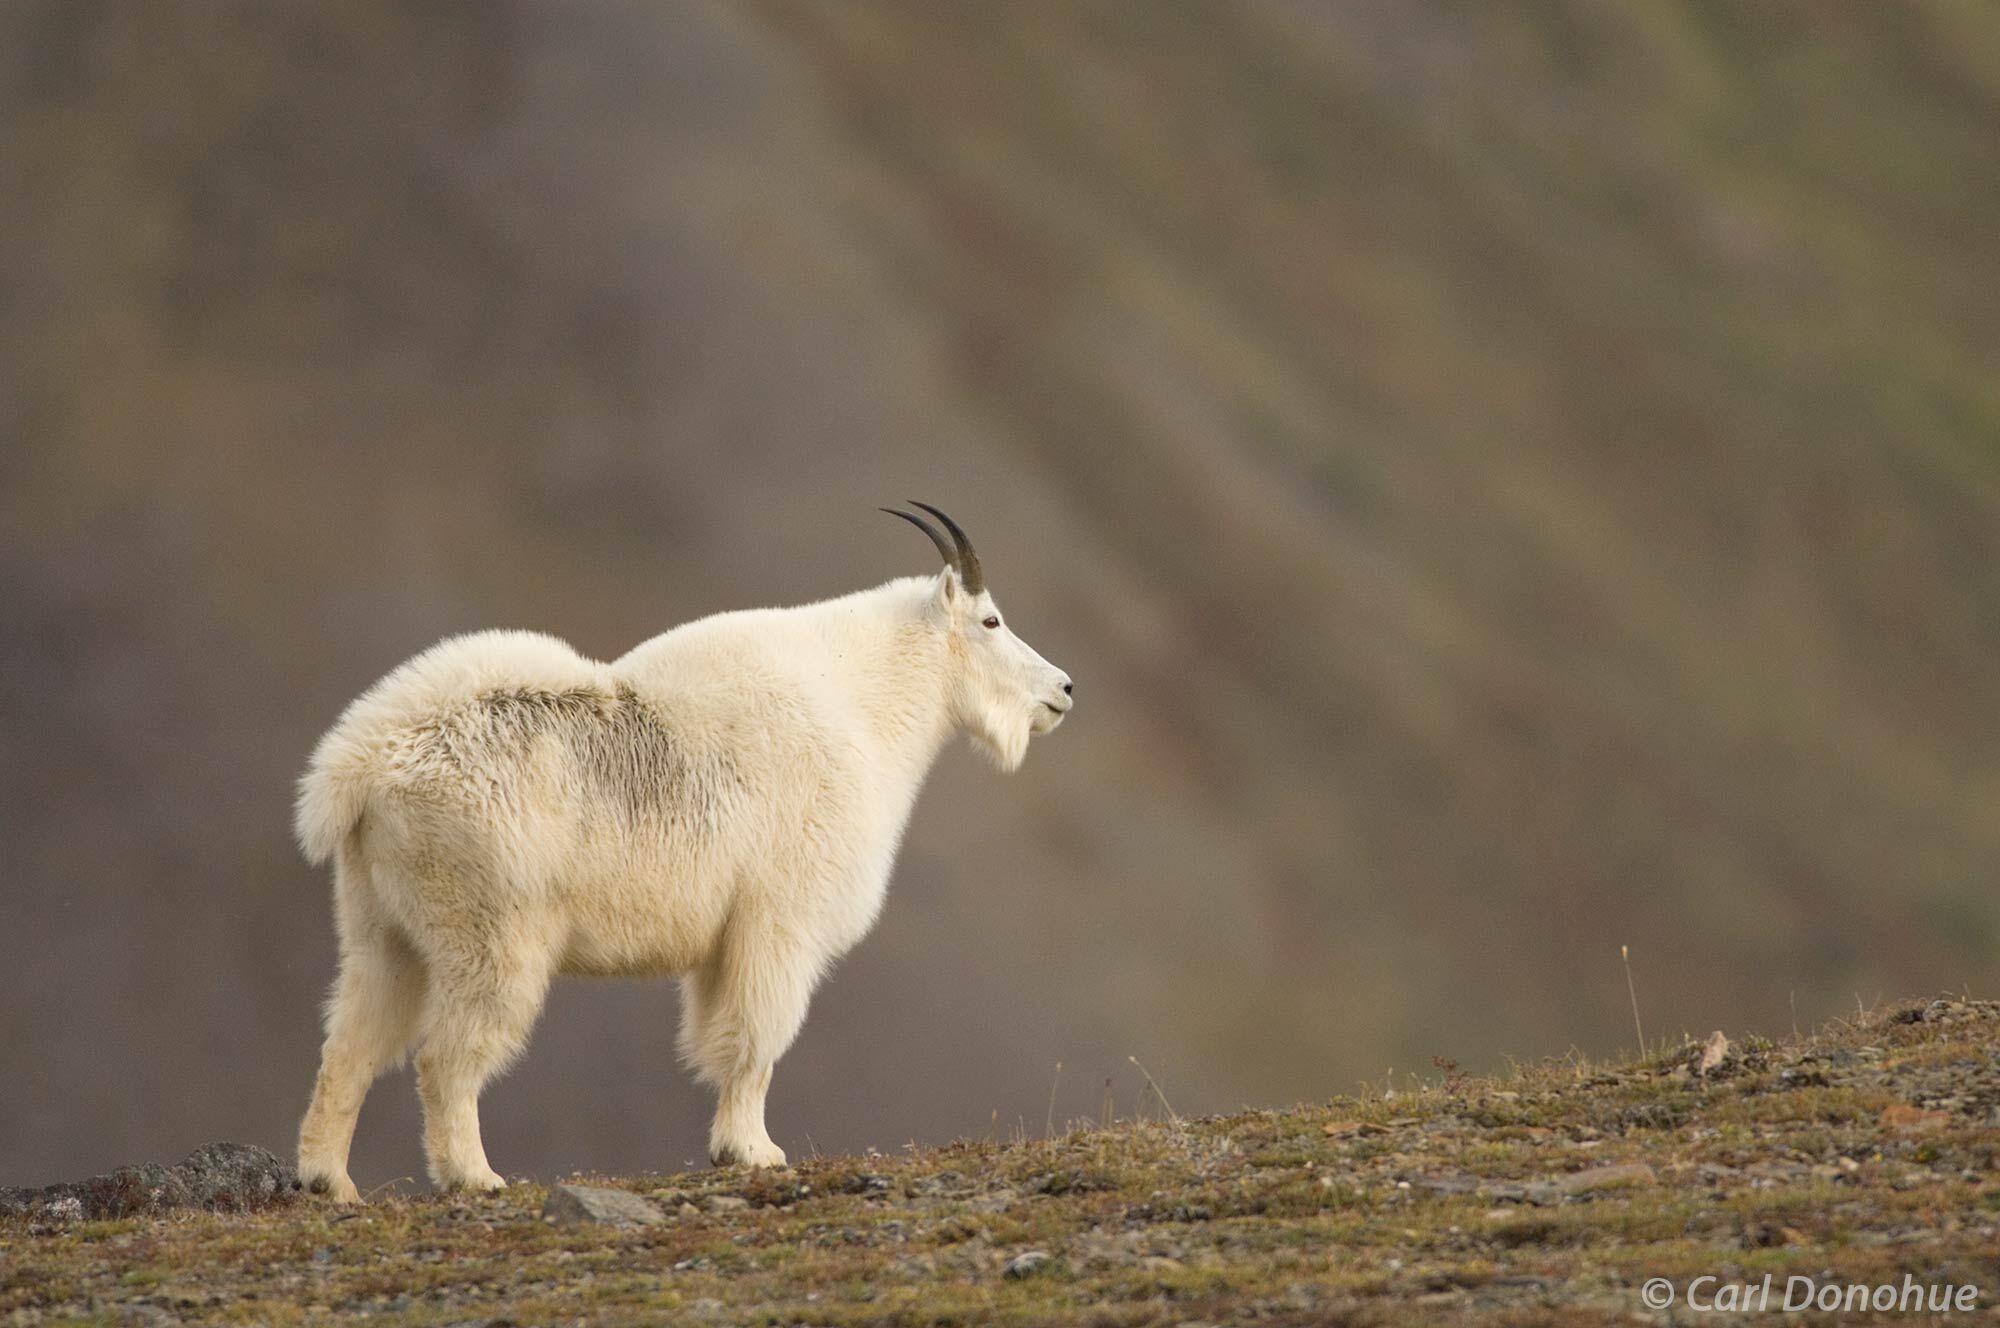 As a solitary animal, the mountain goat roams the wilds of Wrangell-St. Elias National Park, navigating its way through the rugged...